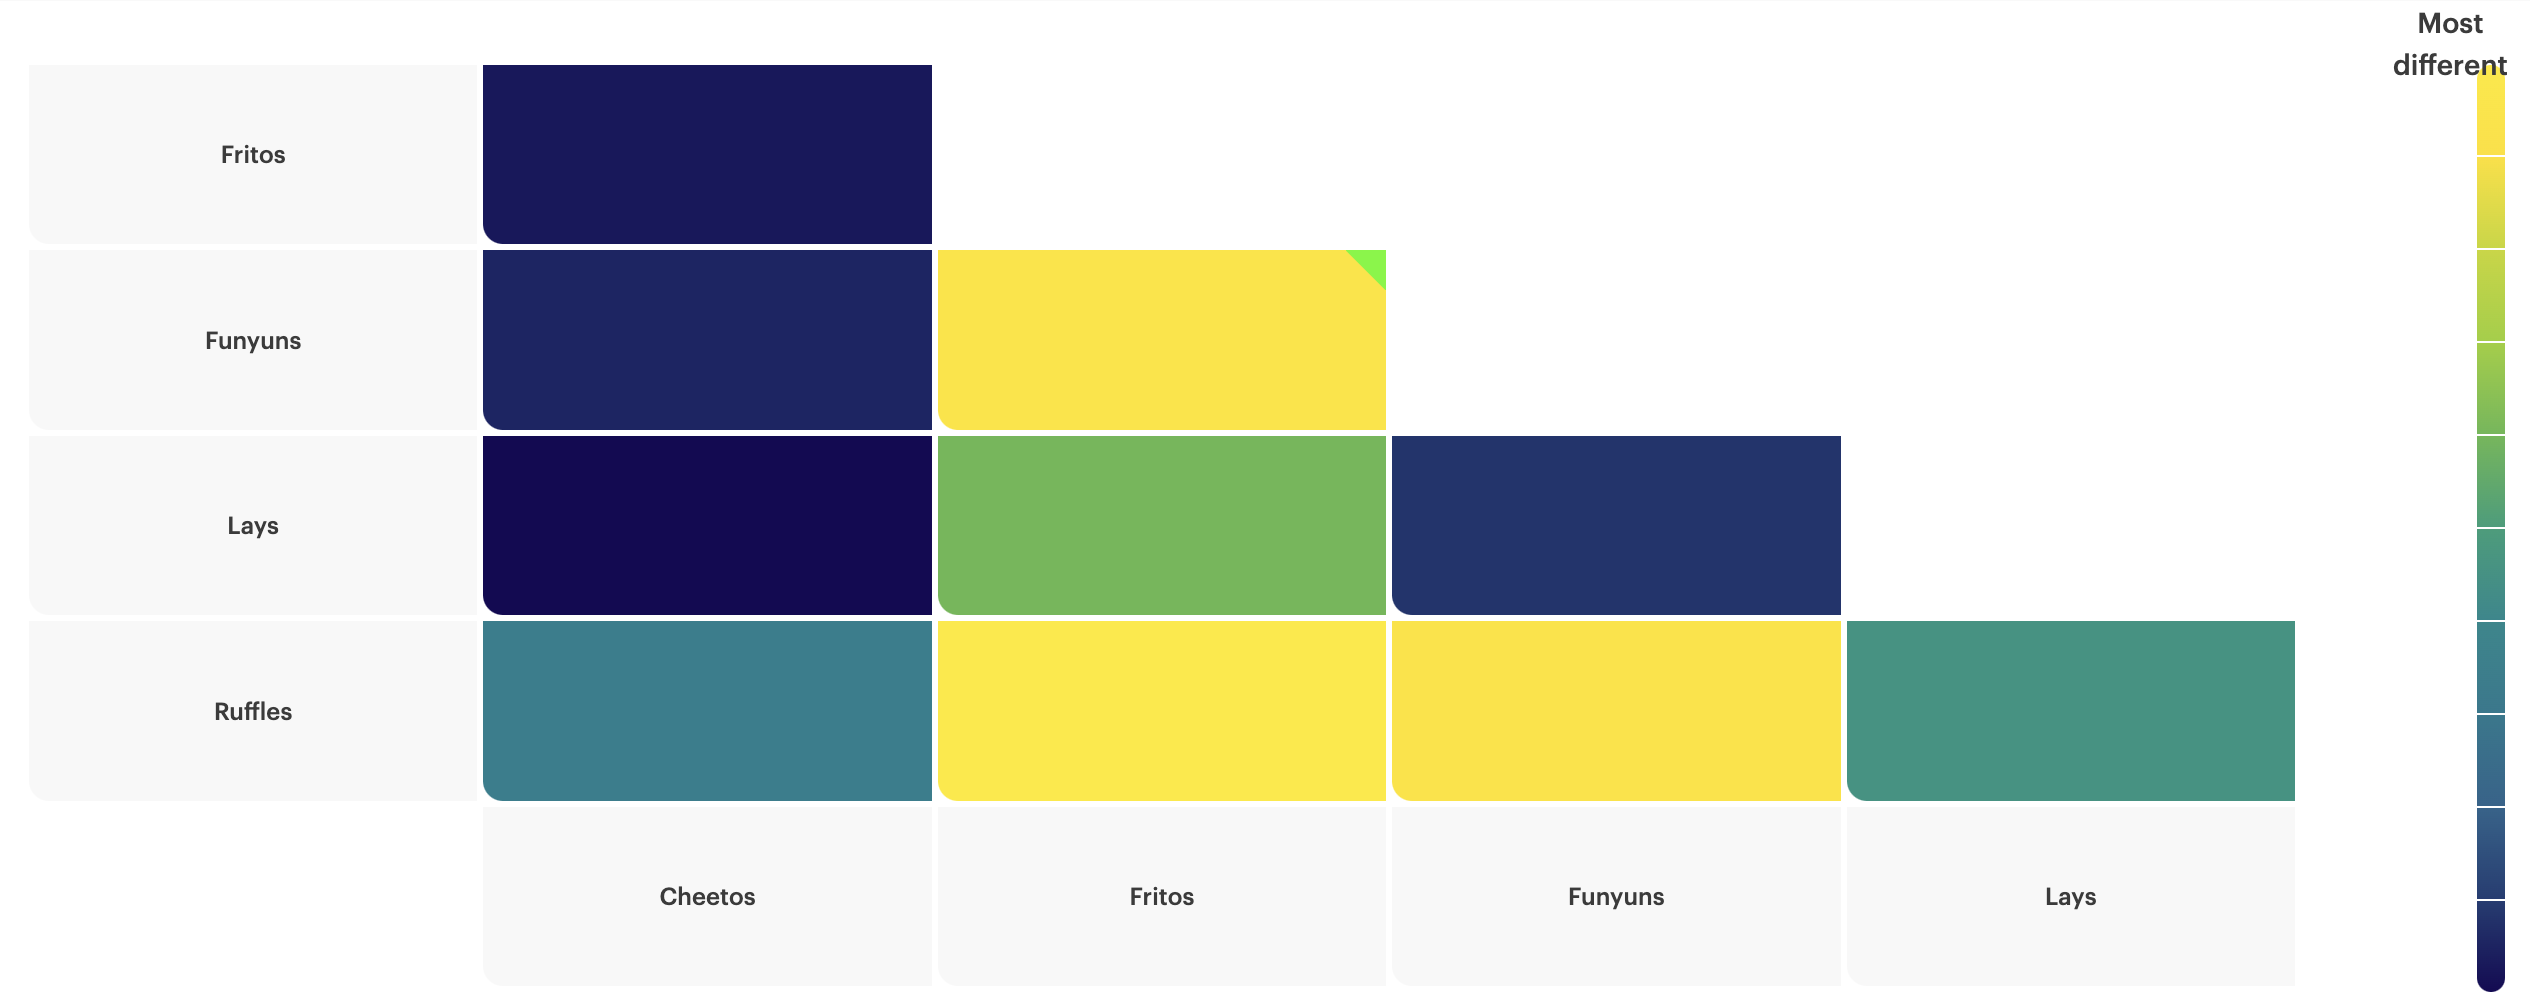 A Relative Insight Heatmap showing that Ruffles was the most dissimilar of salty snack brands